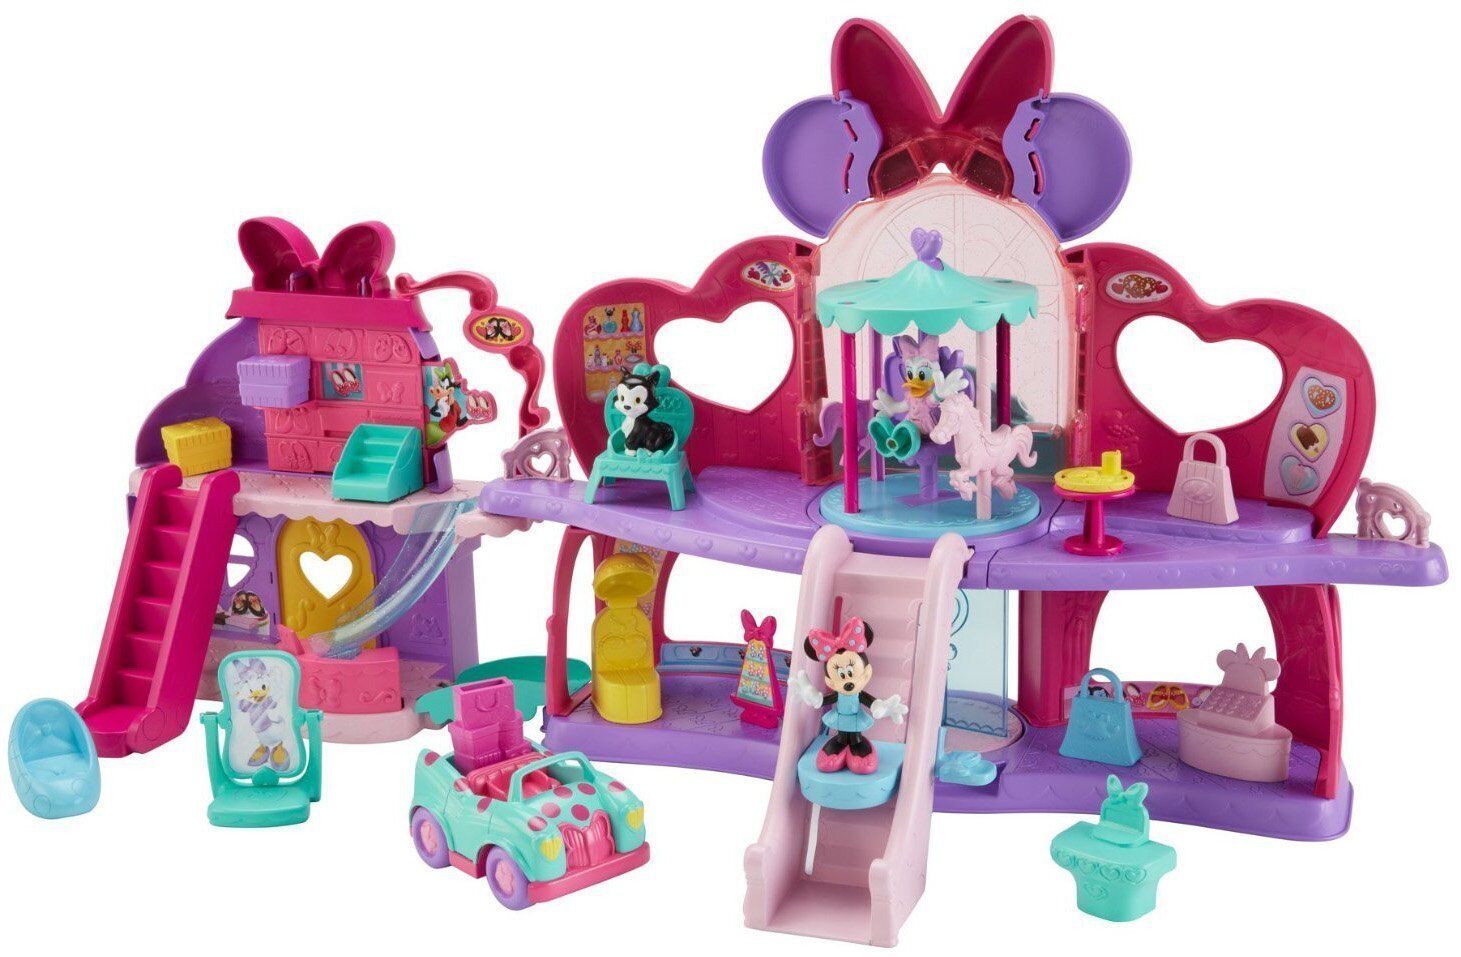 Disney Minnie Mouse Fabulous Shopping Mall Figures Play Set Toys Doll House Gift